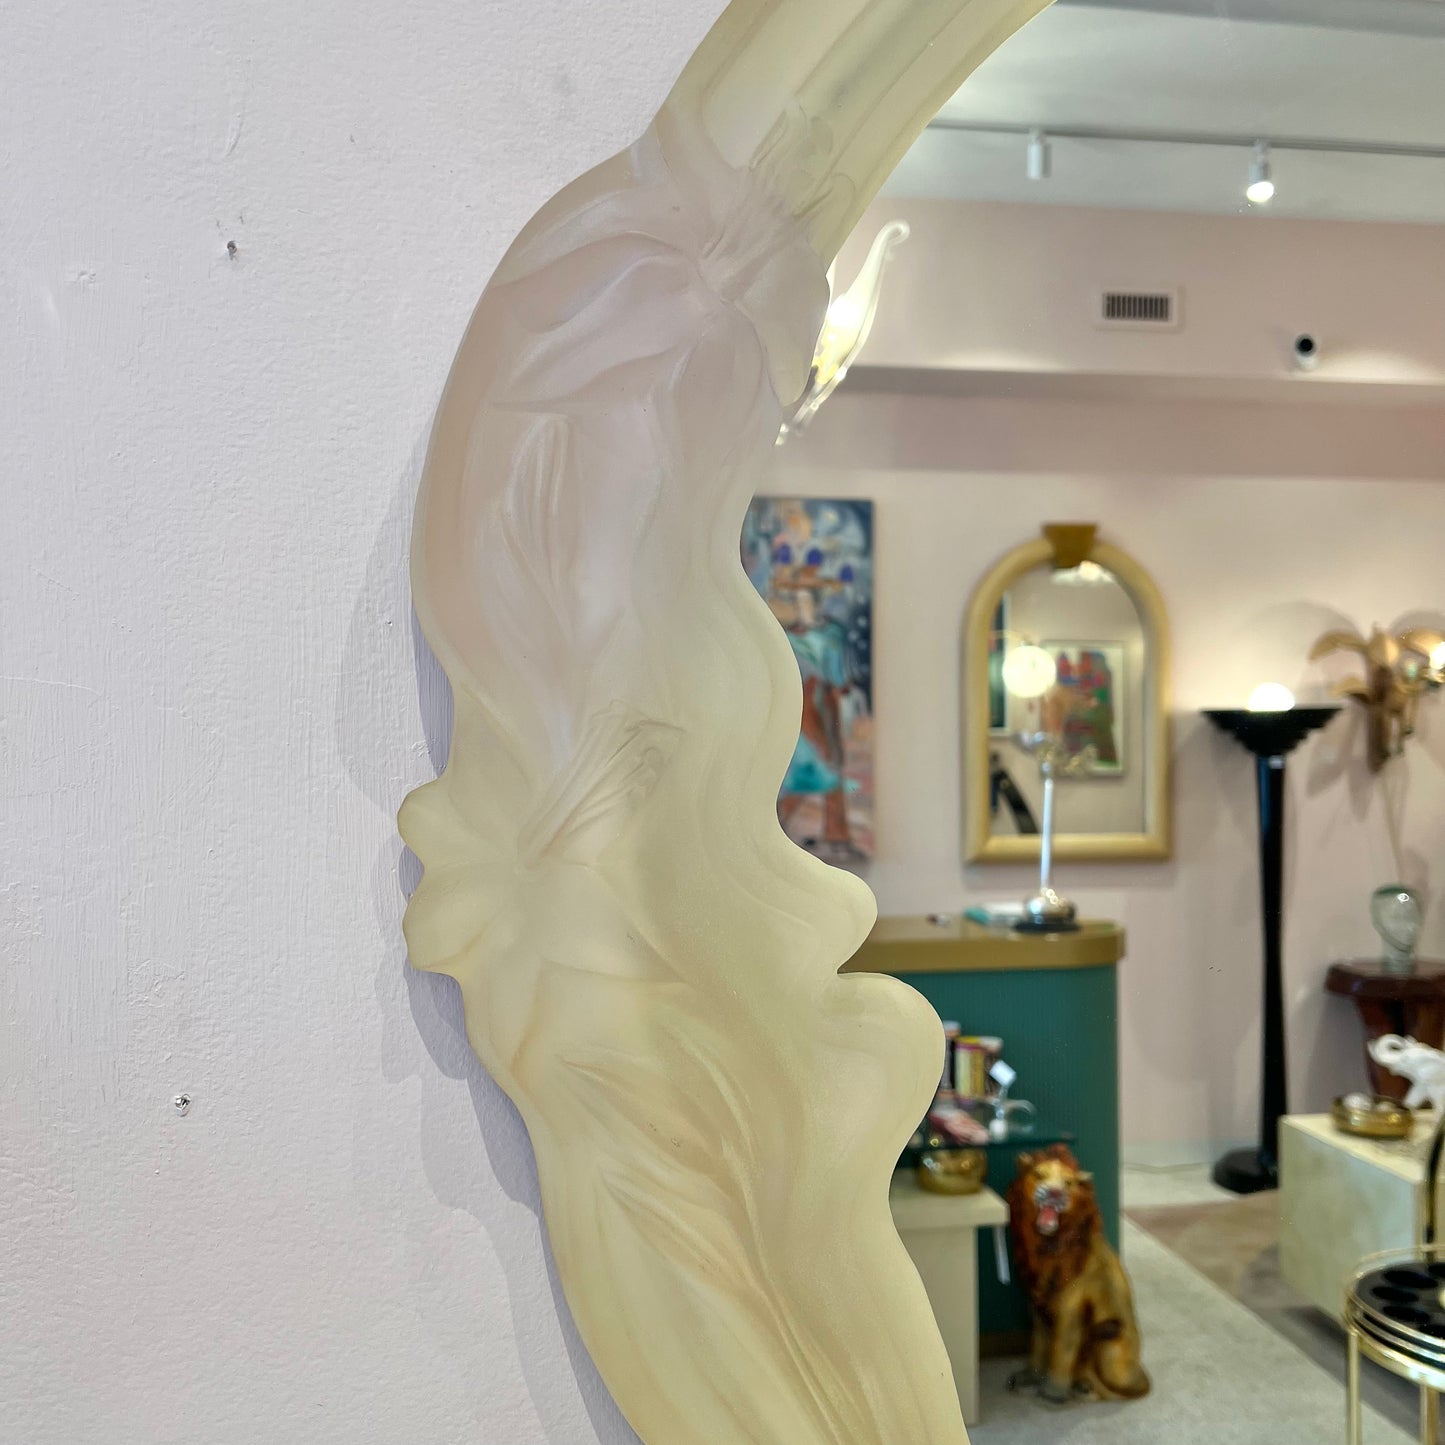 1984 Frosted Acrylic Art Nouveau Woman Mirror by Sculpture Ind.